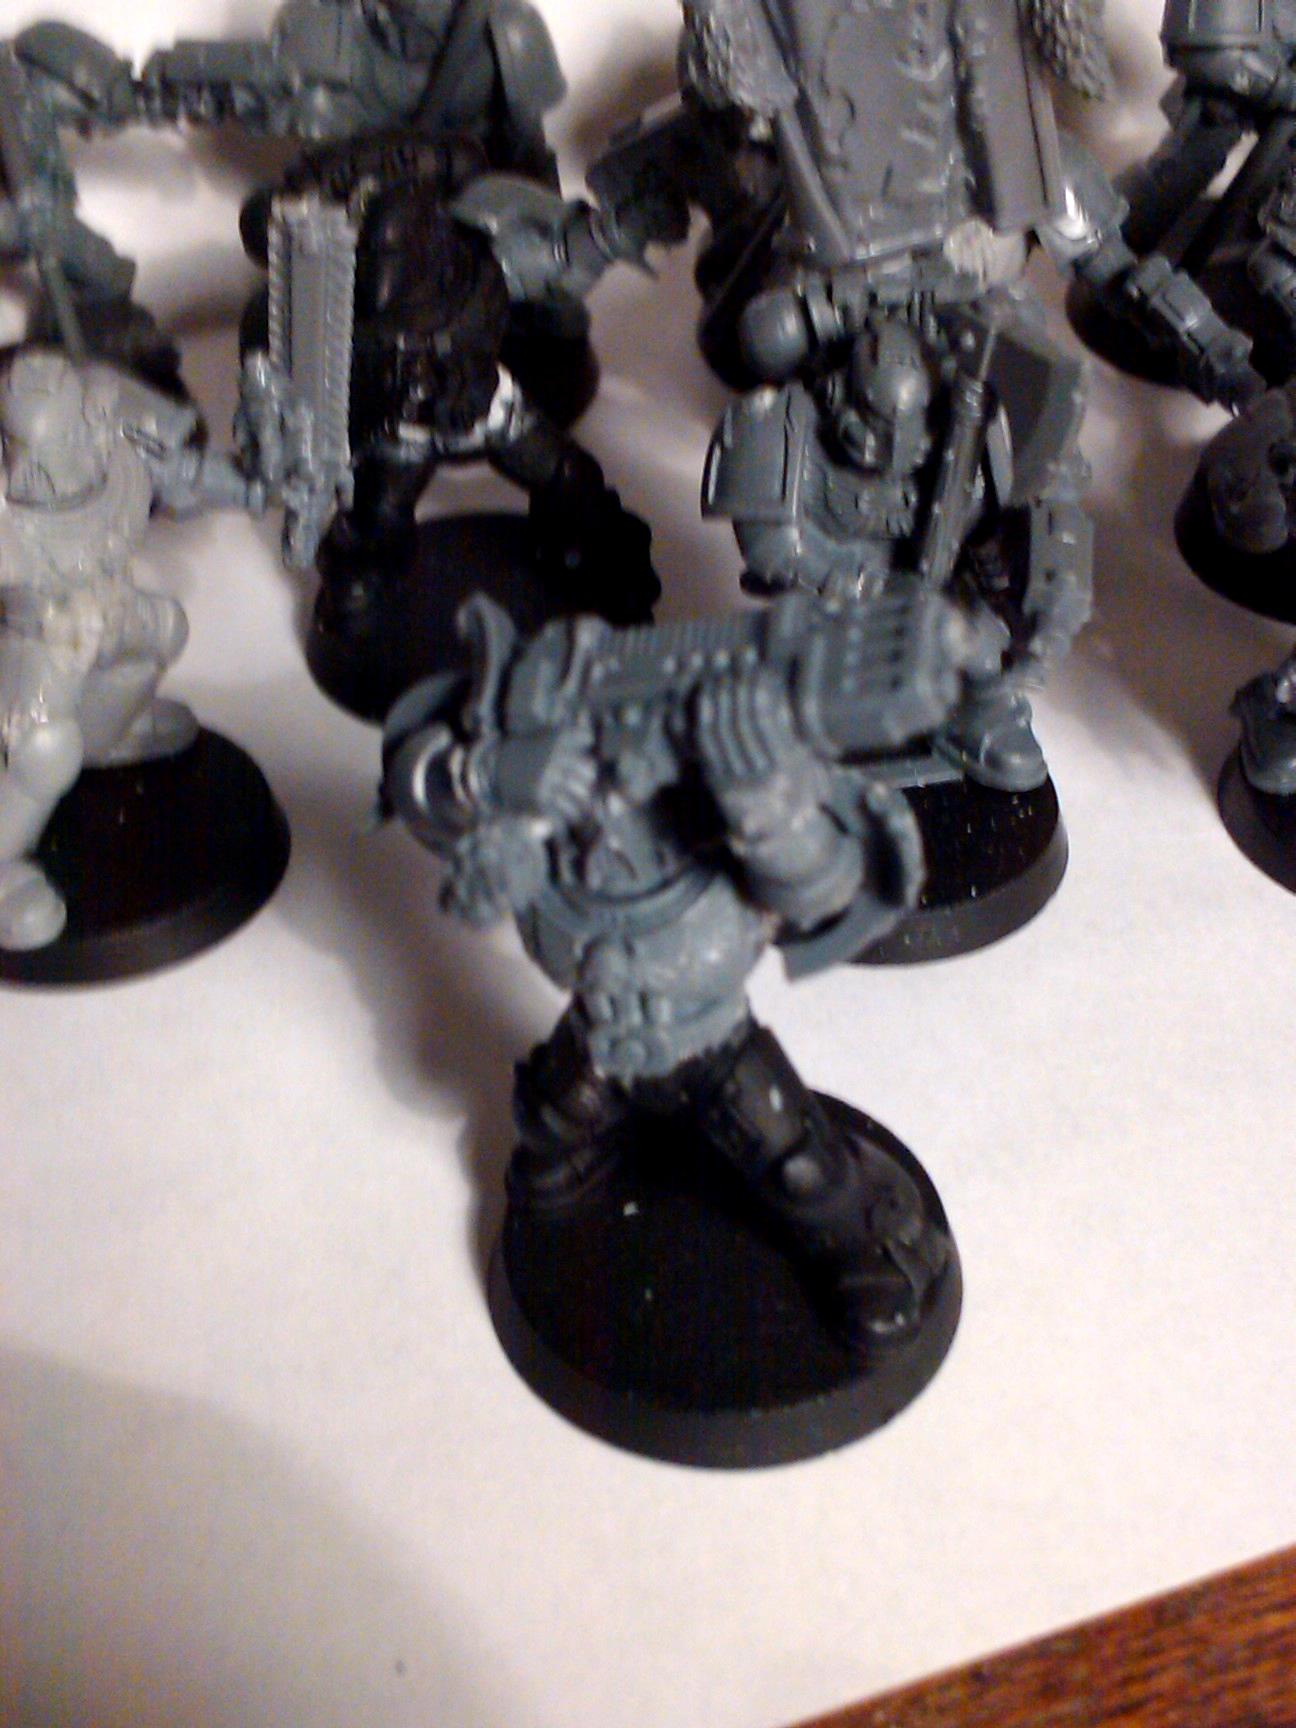 Assault, Assault On Black Reach, Blood Claws, Conversion, Hobby, Kill Team, Scenario, Space Marines, Space Wolves, Sw